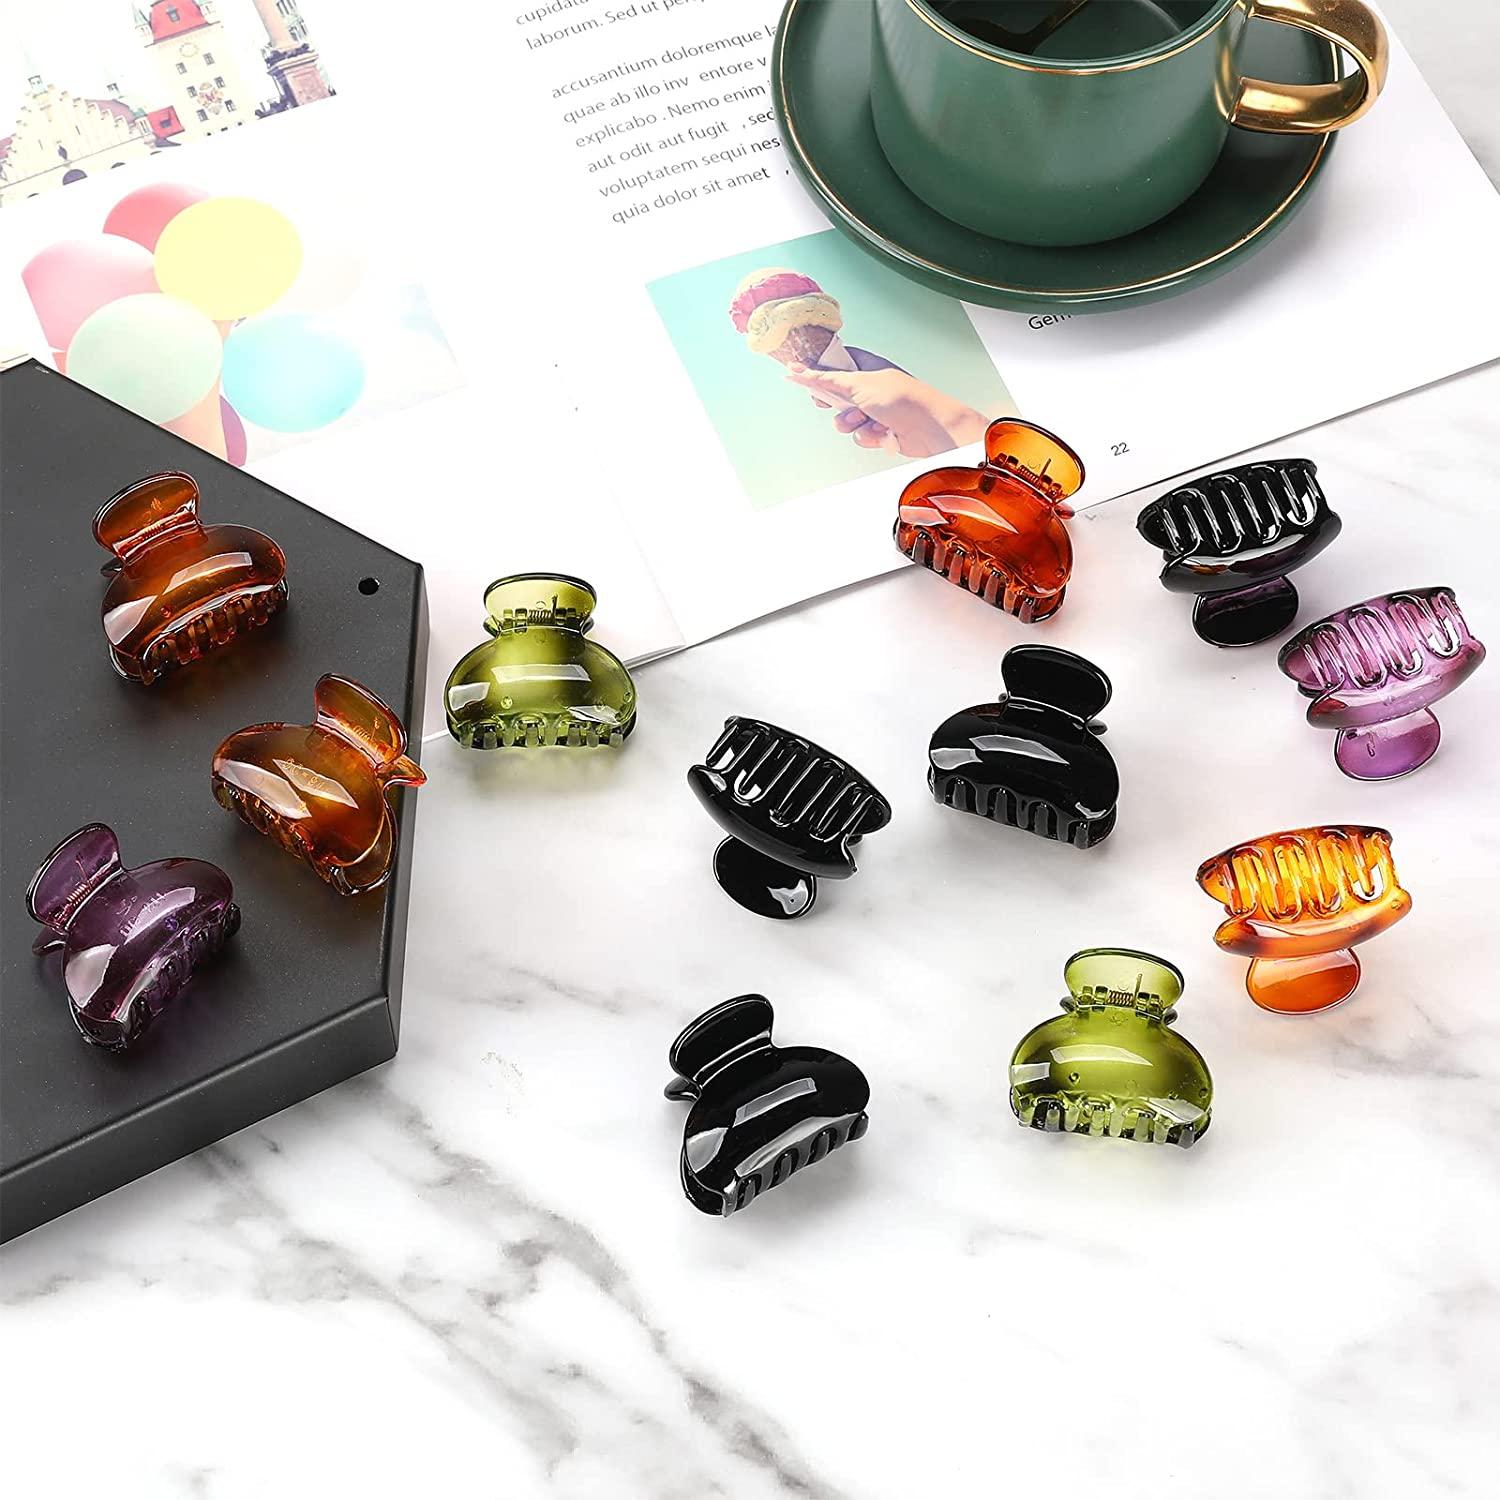 Lolalet 8 Colors Hair Clips Claw Clips Hair Claw Clips, 2 Styles Nonslip  Medium Large Jaw Clip for Women Girls, 4 Square Matte and 4 Bright Acrylic